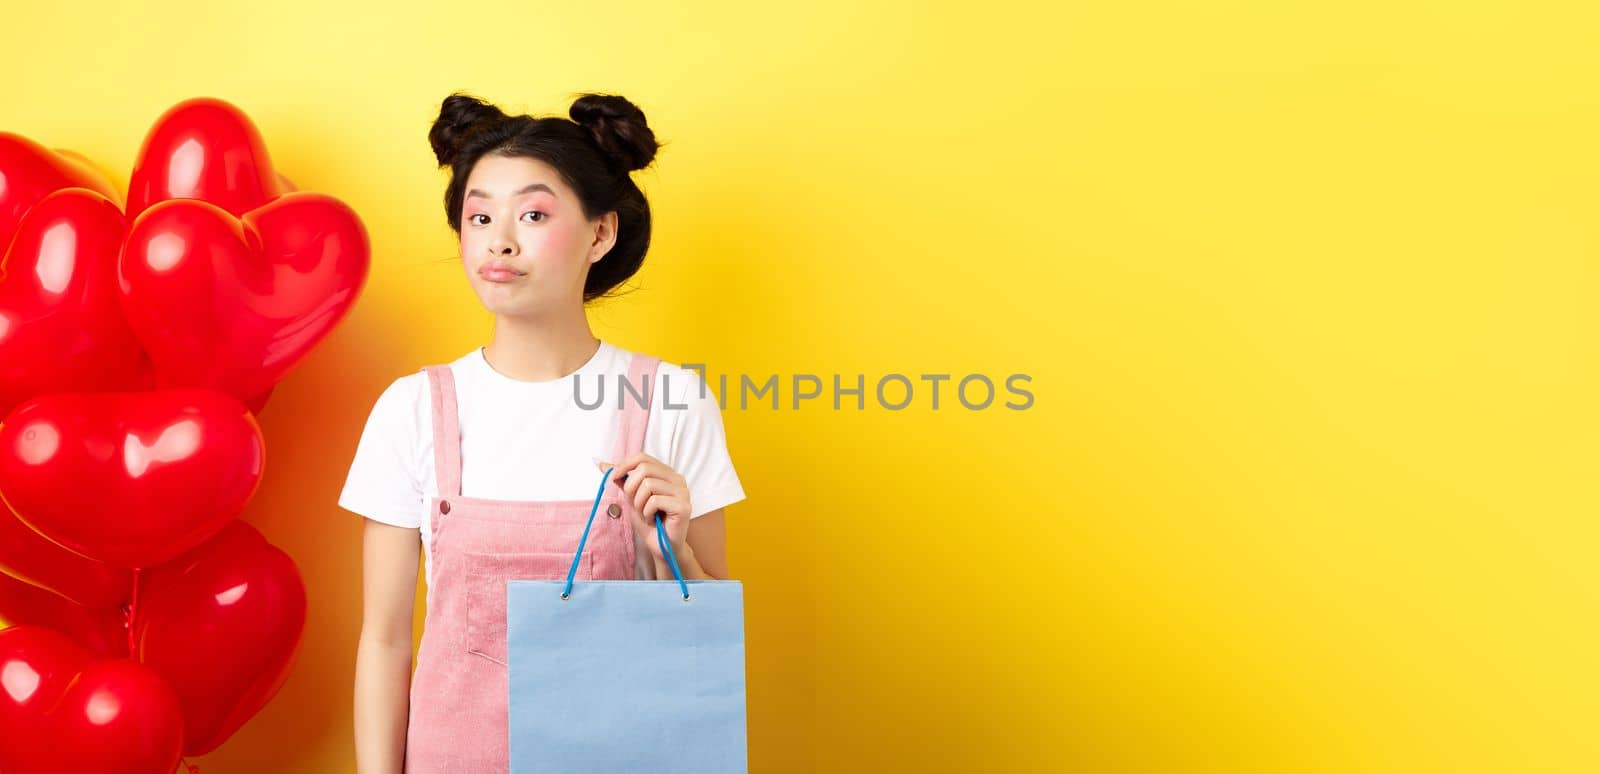 Happy Valentines day. Stylish asian single girl buying herself gift, holding shopping bag and looking unbothered at camera, standing over yellow background.